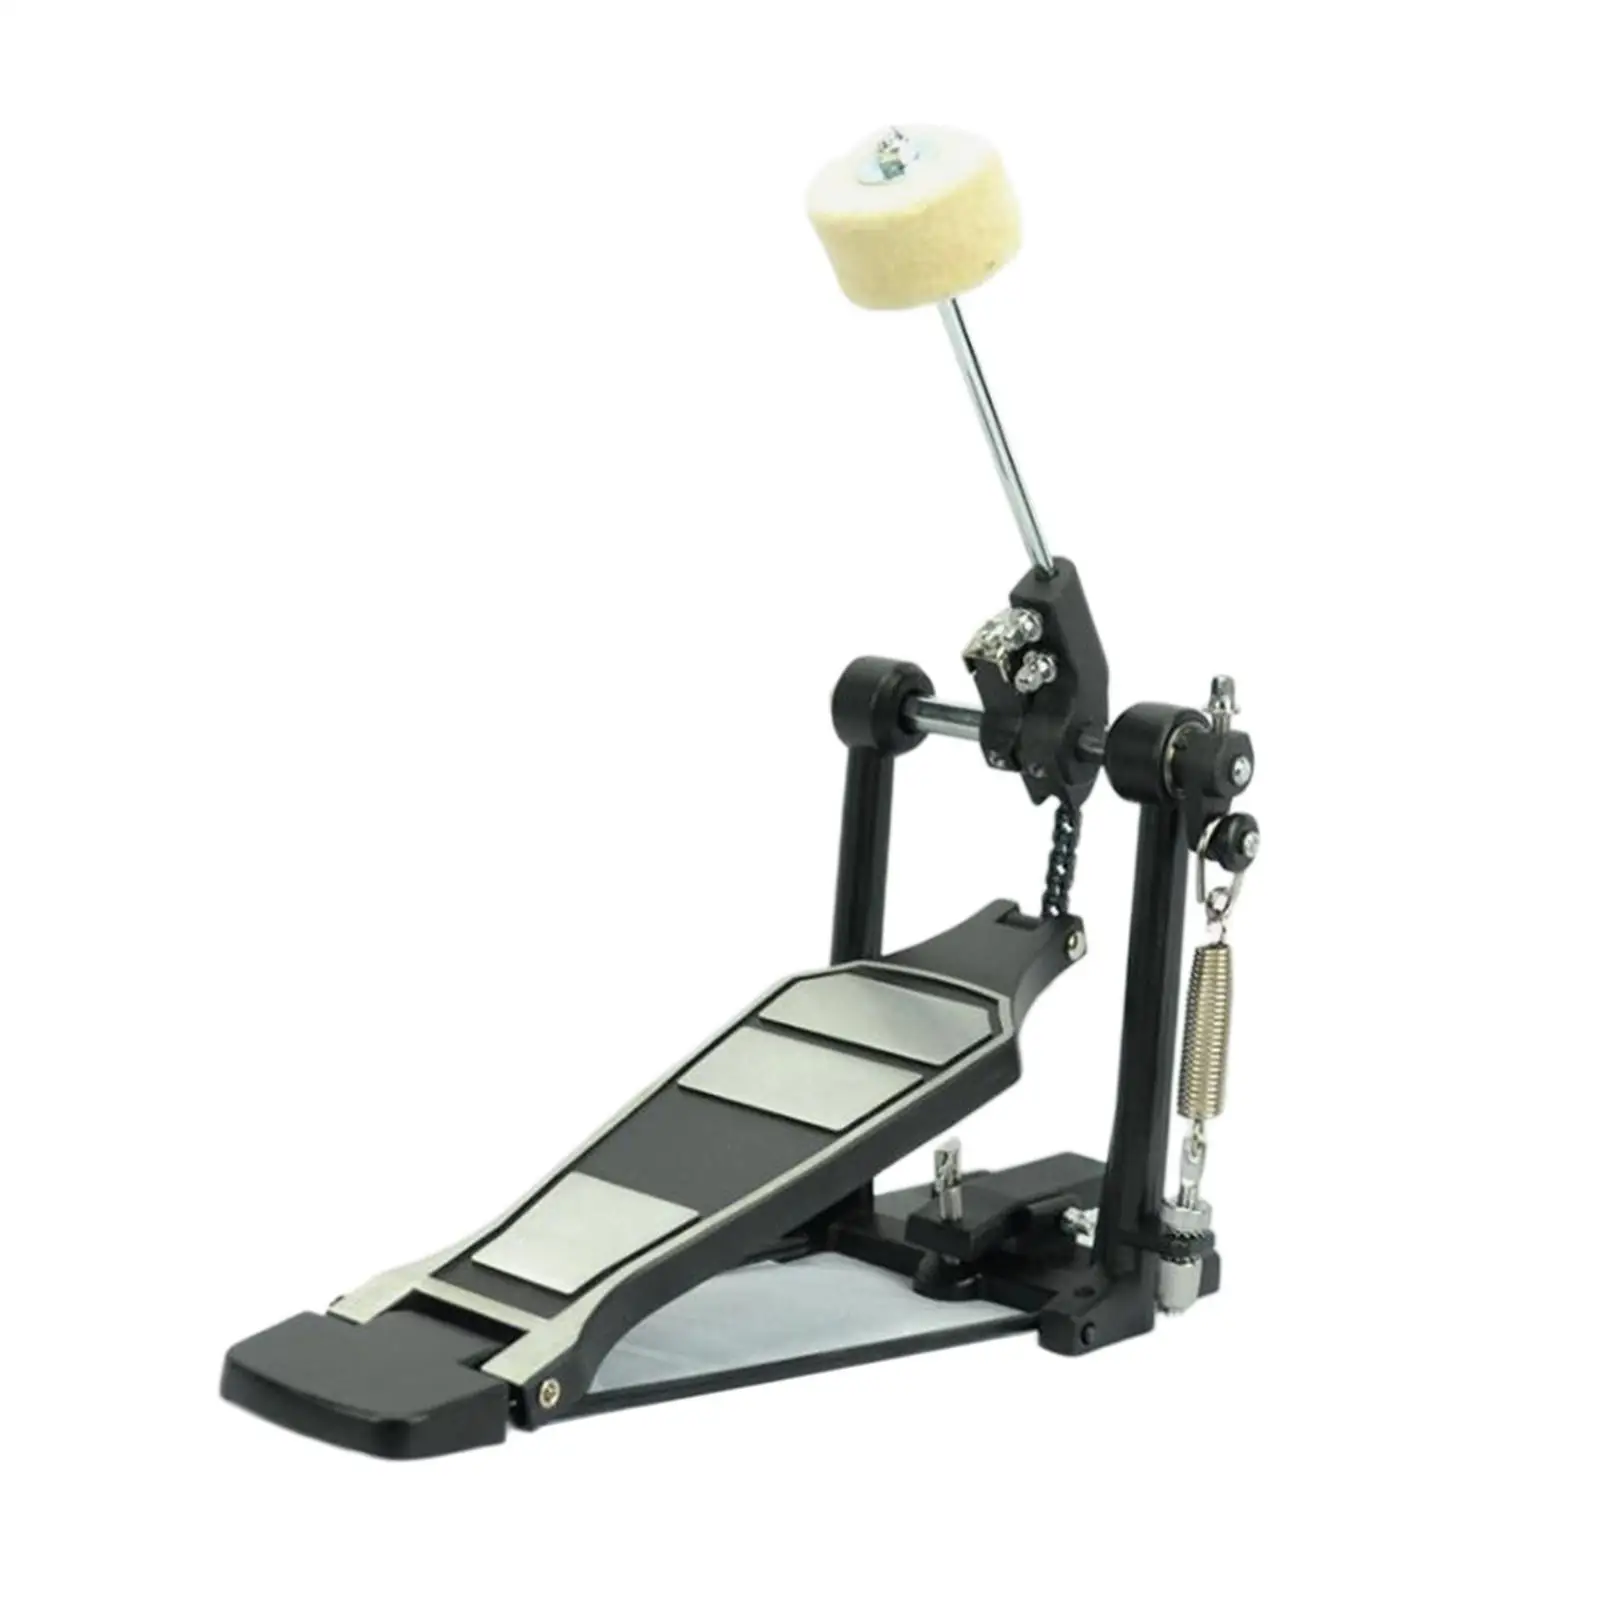 Bass Drum Pedal Chain Drive Drum Step for Drum Set Instrument Portable Universal for Jazz Drums Drummer Gifts Drum Beater Kick